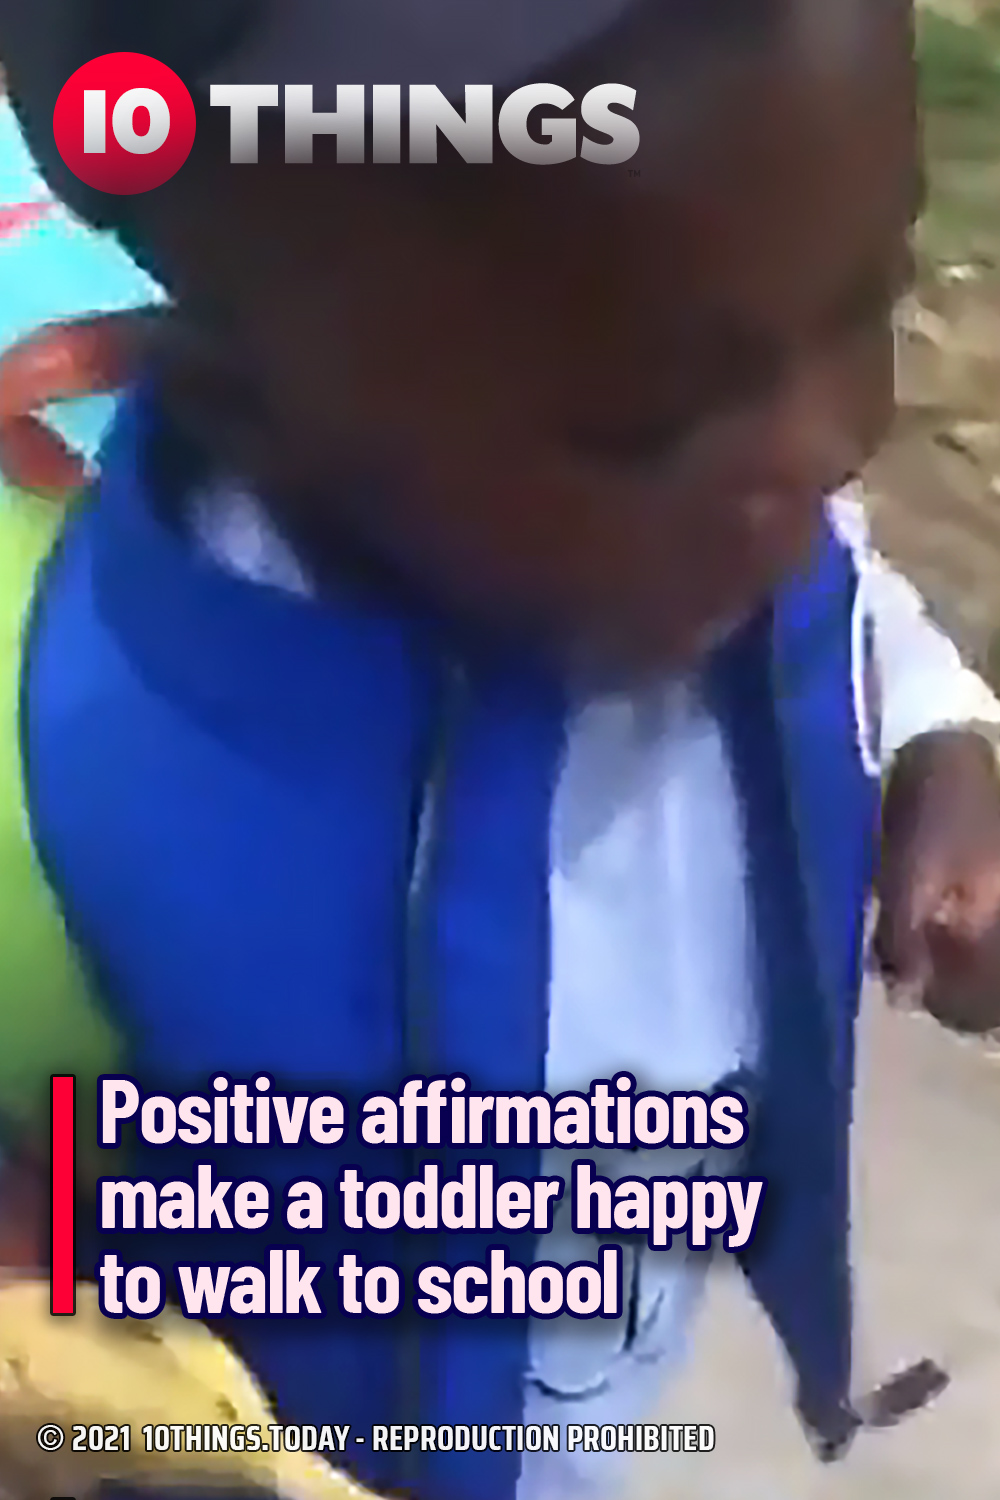 Positive affirmations make a toddler happy to walk to school